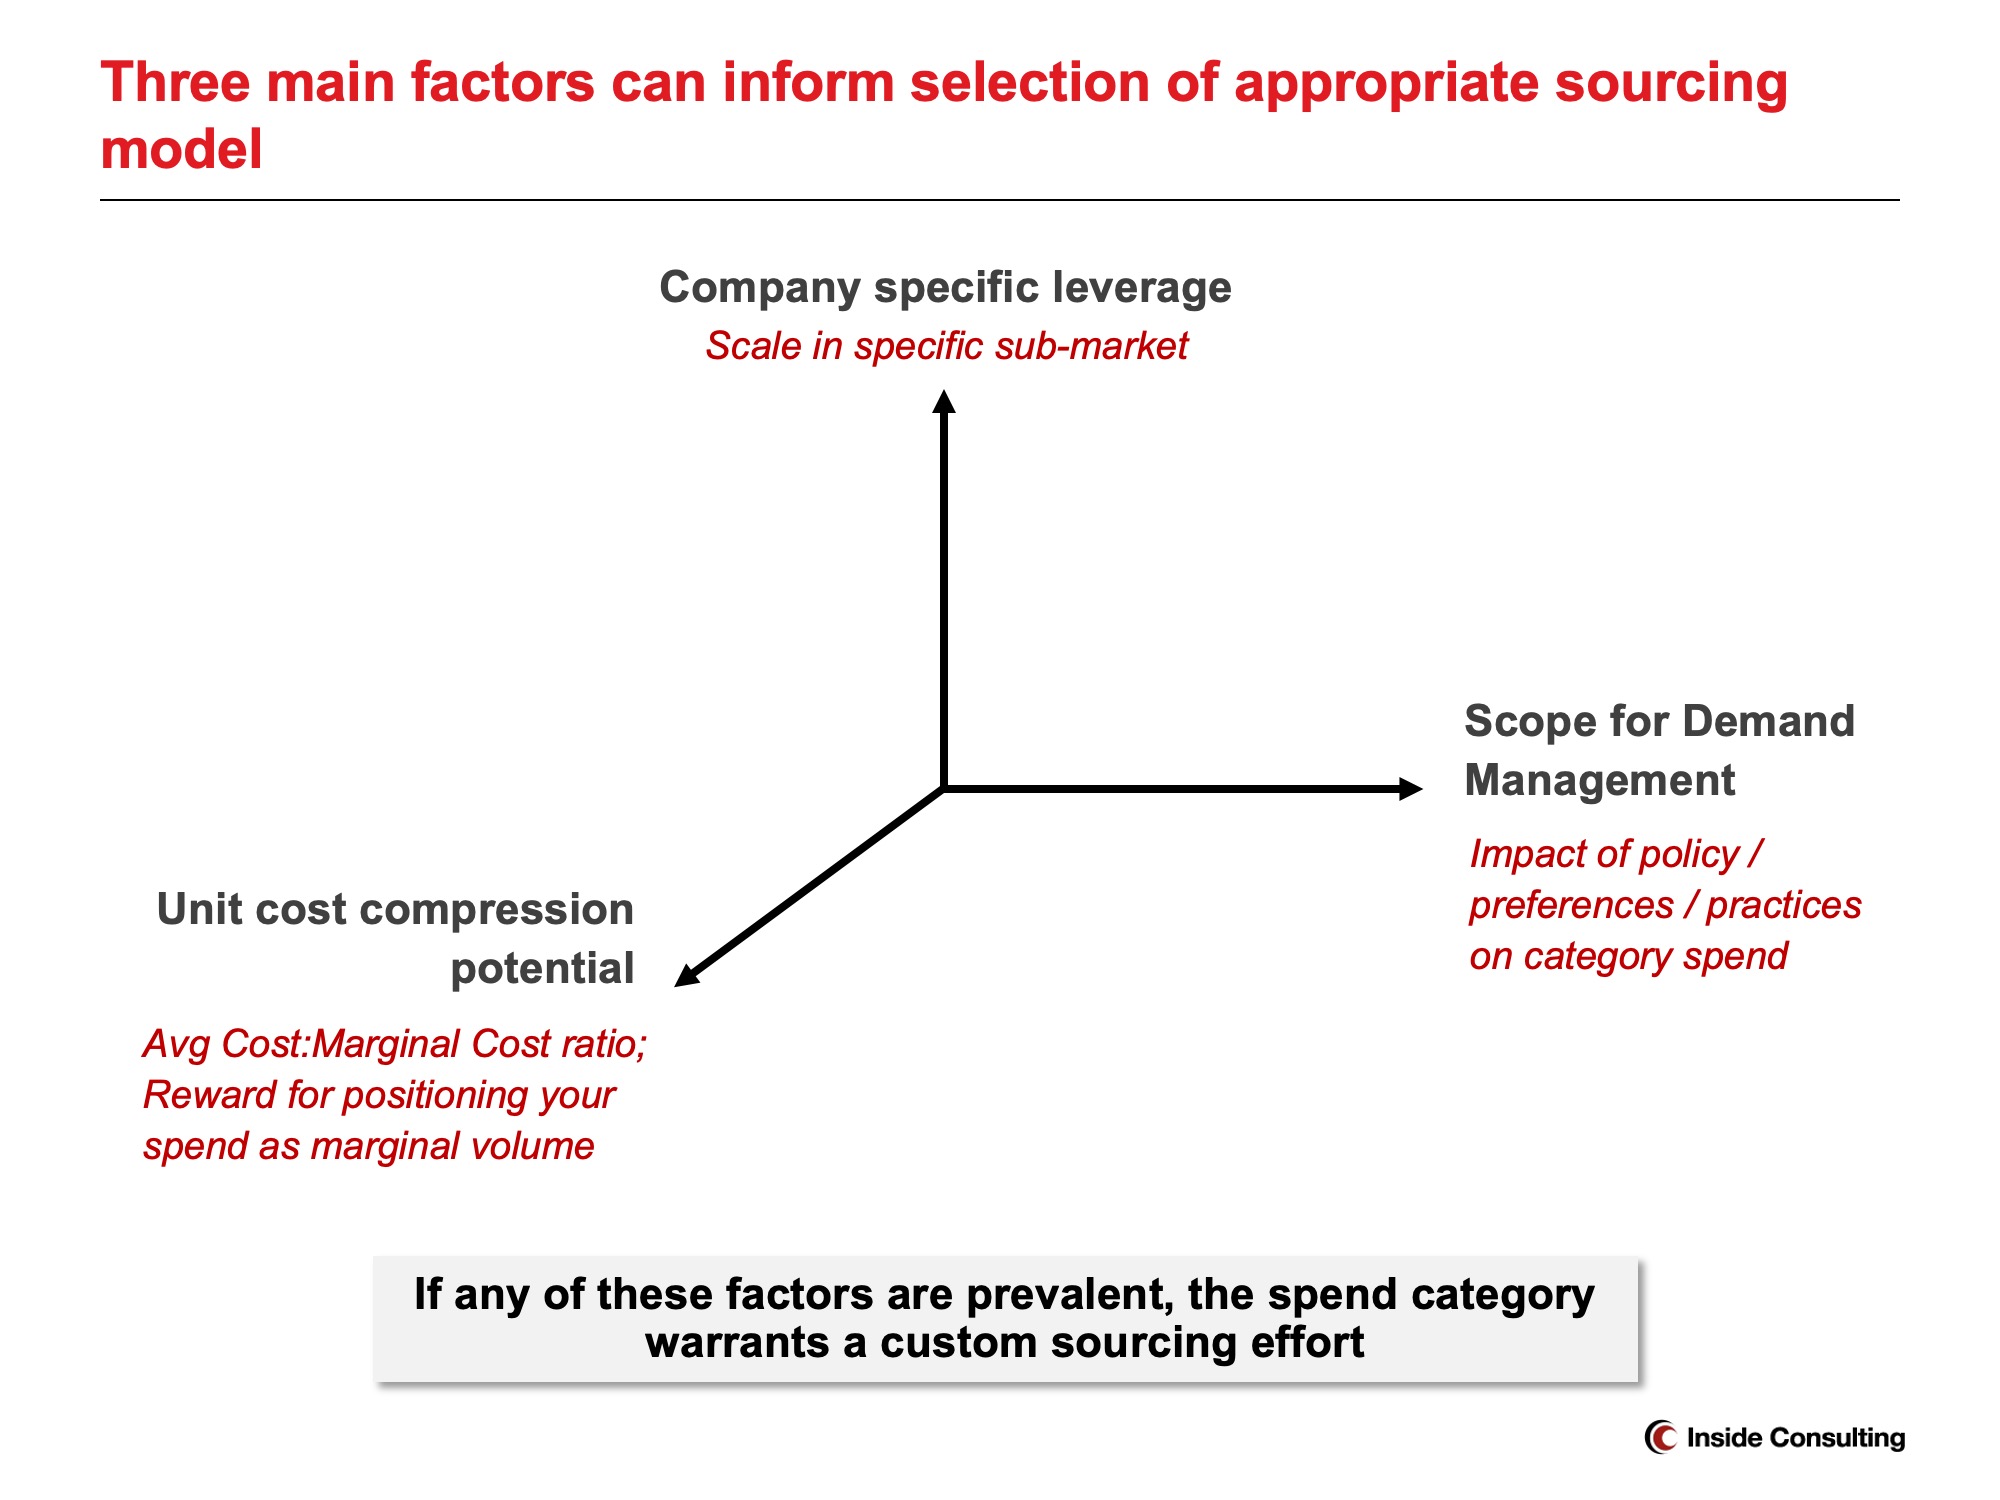 Three main factors can inform selection of appropriate sourcing model